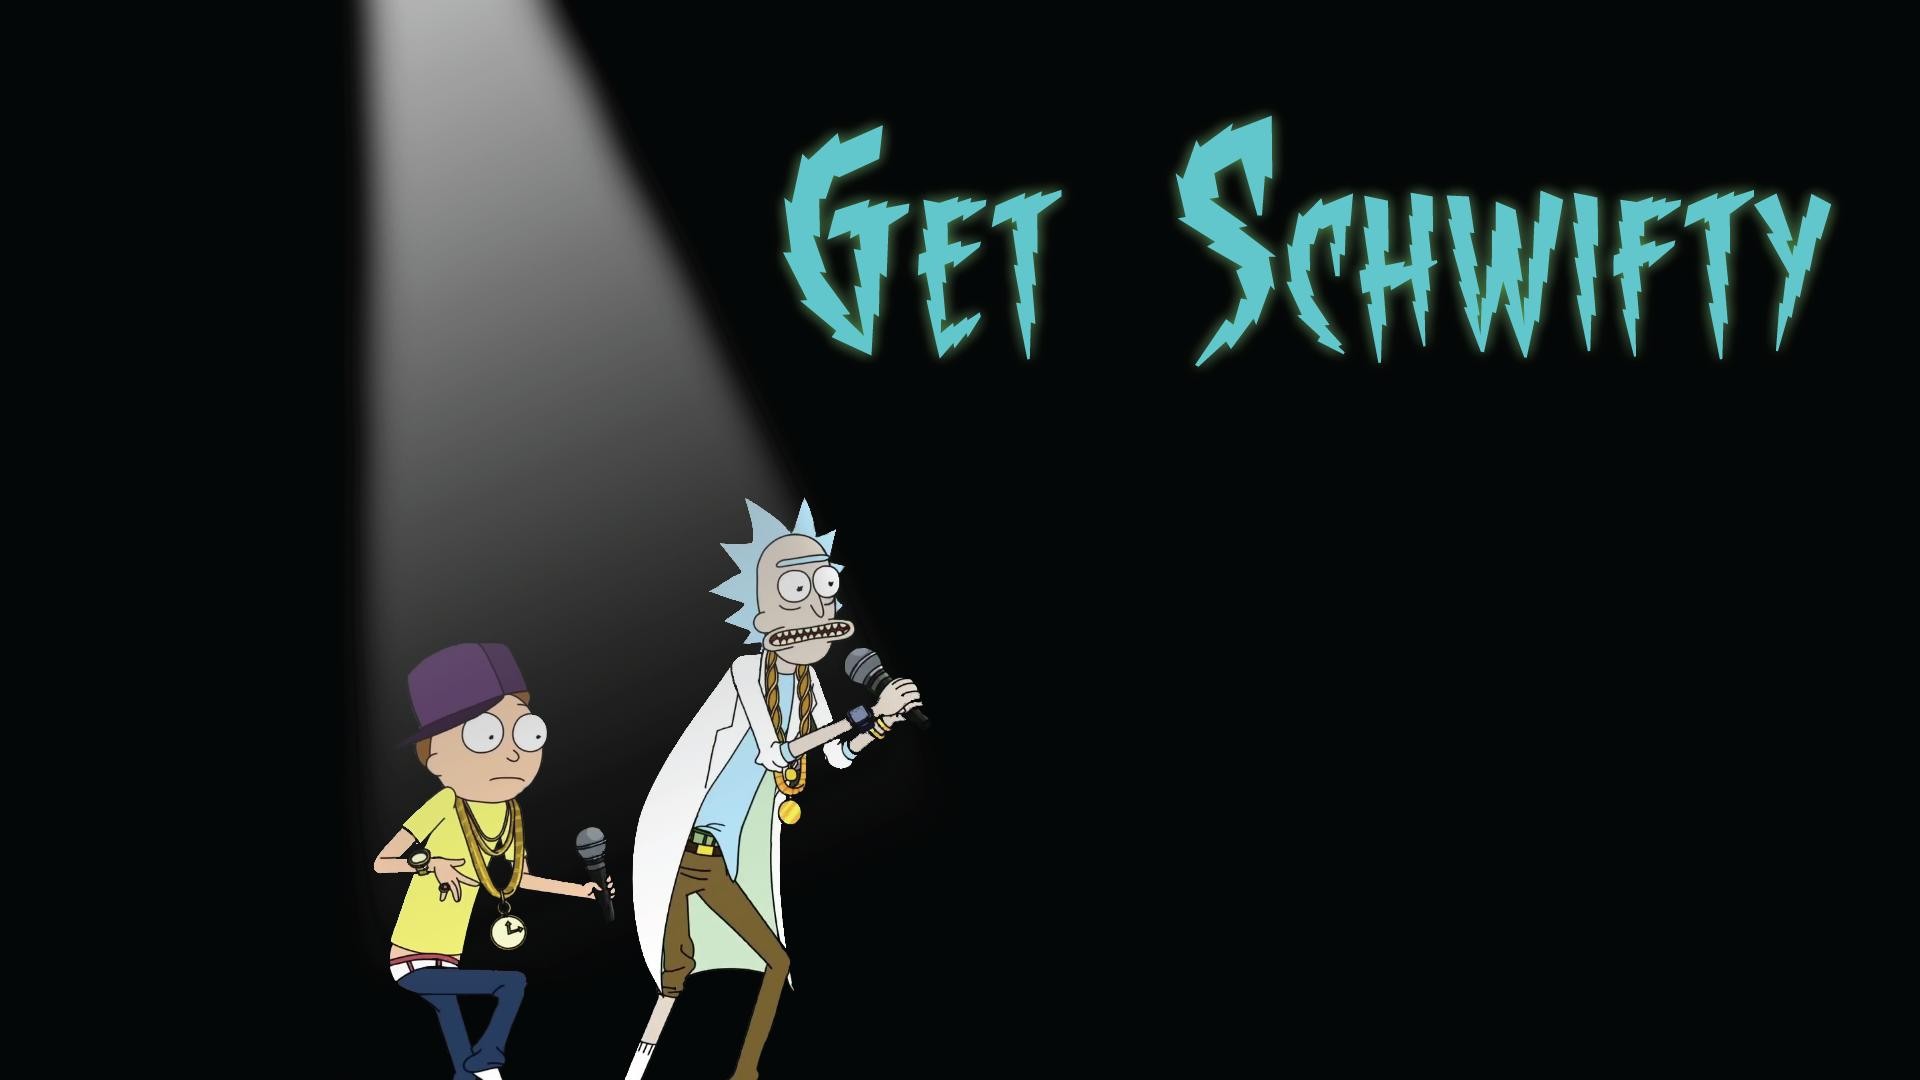 Desktop Wallpaper Rick and Morty Art with resolution 1920X1080 pixel. You can use this wallpaper as background for your desktop Computer Screensavers, Android or iPhone smartphones